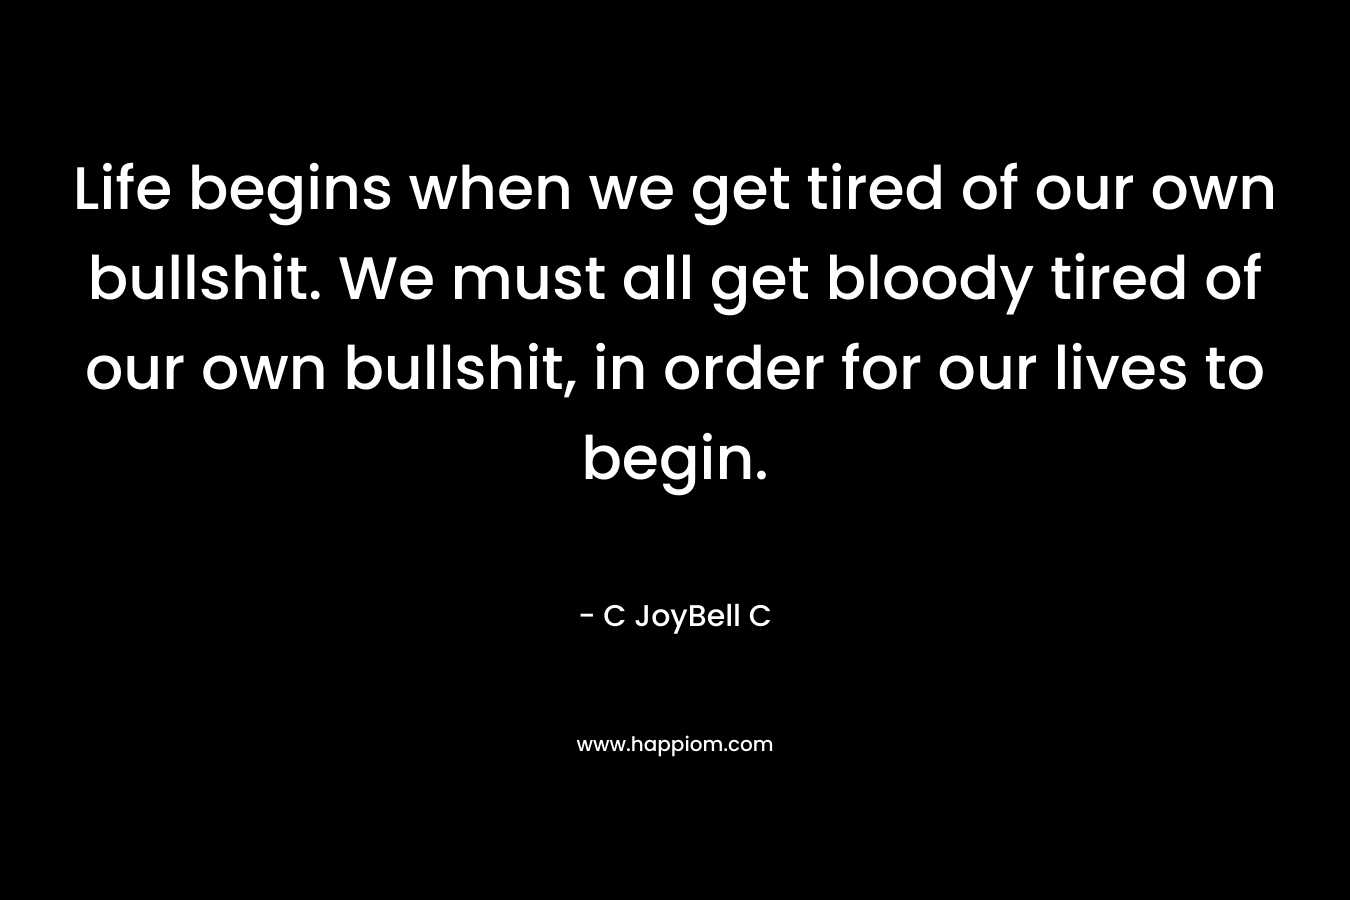 Life begins when we get tired of our own bullshit. We must all get bloody tired of our own bullshit, in order for our lives to begin.